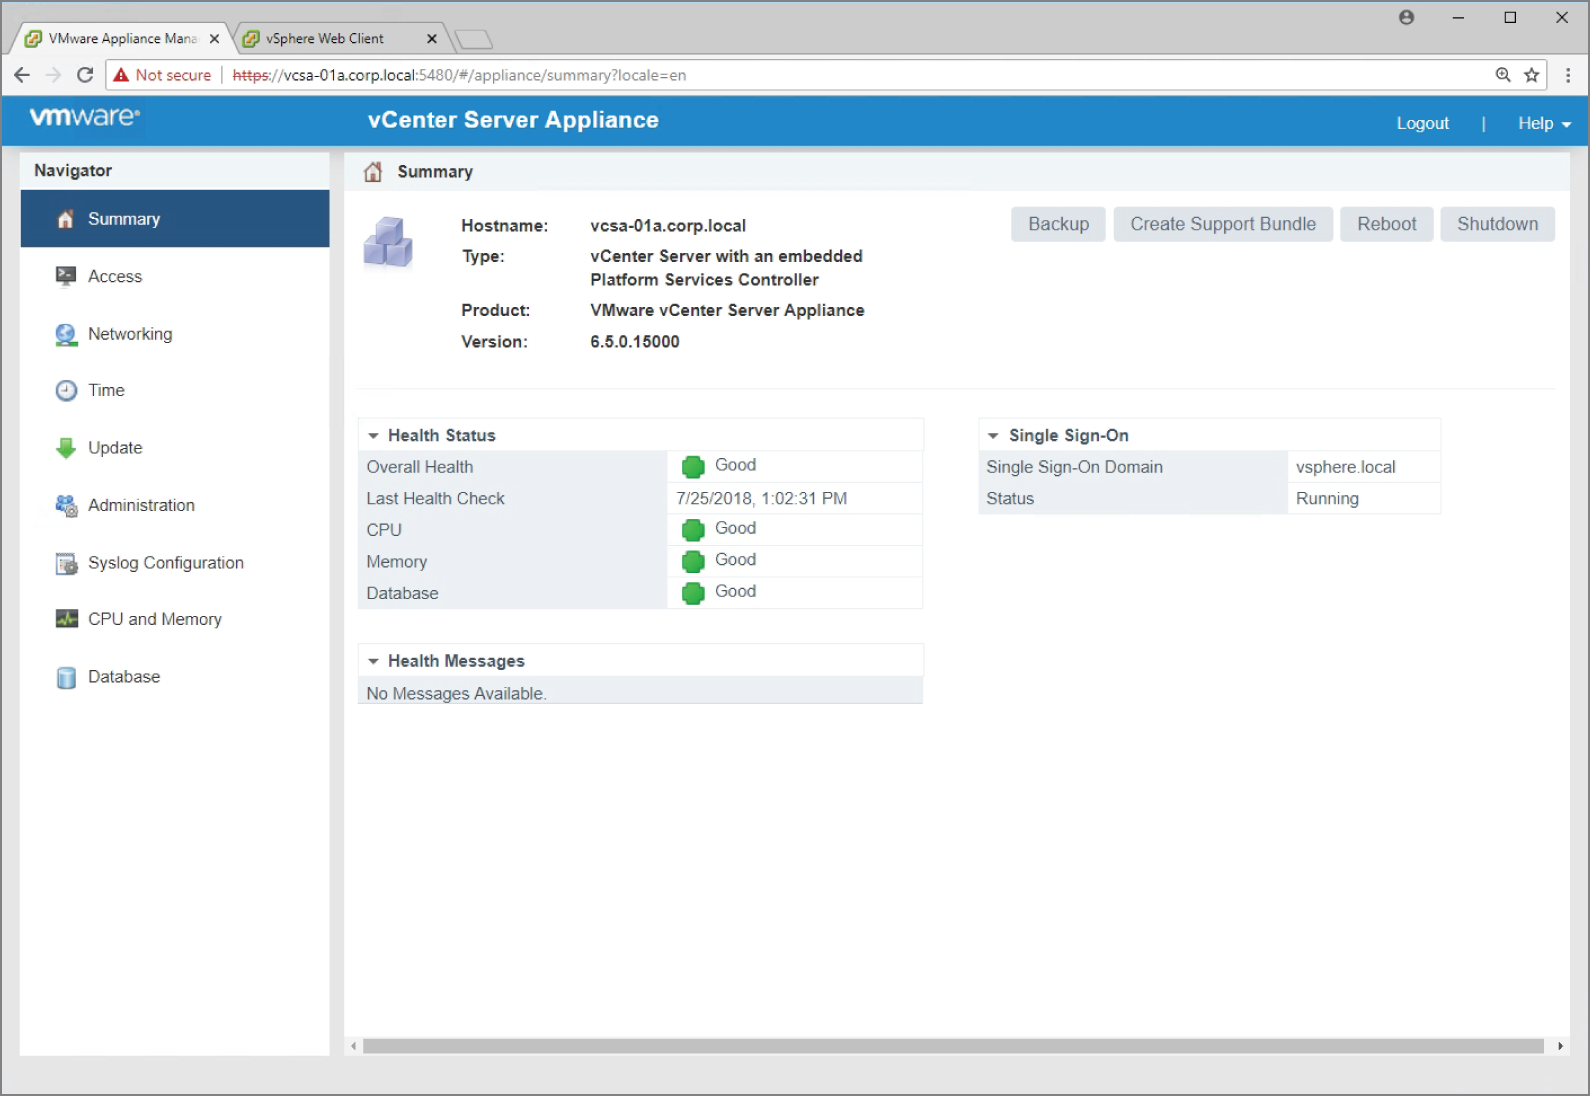 Snapshot of making the back up of VCSA from the Summary screen.